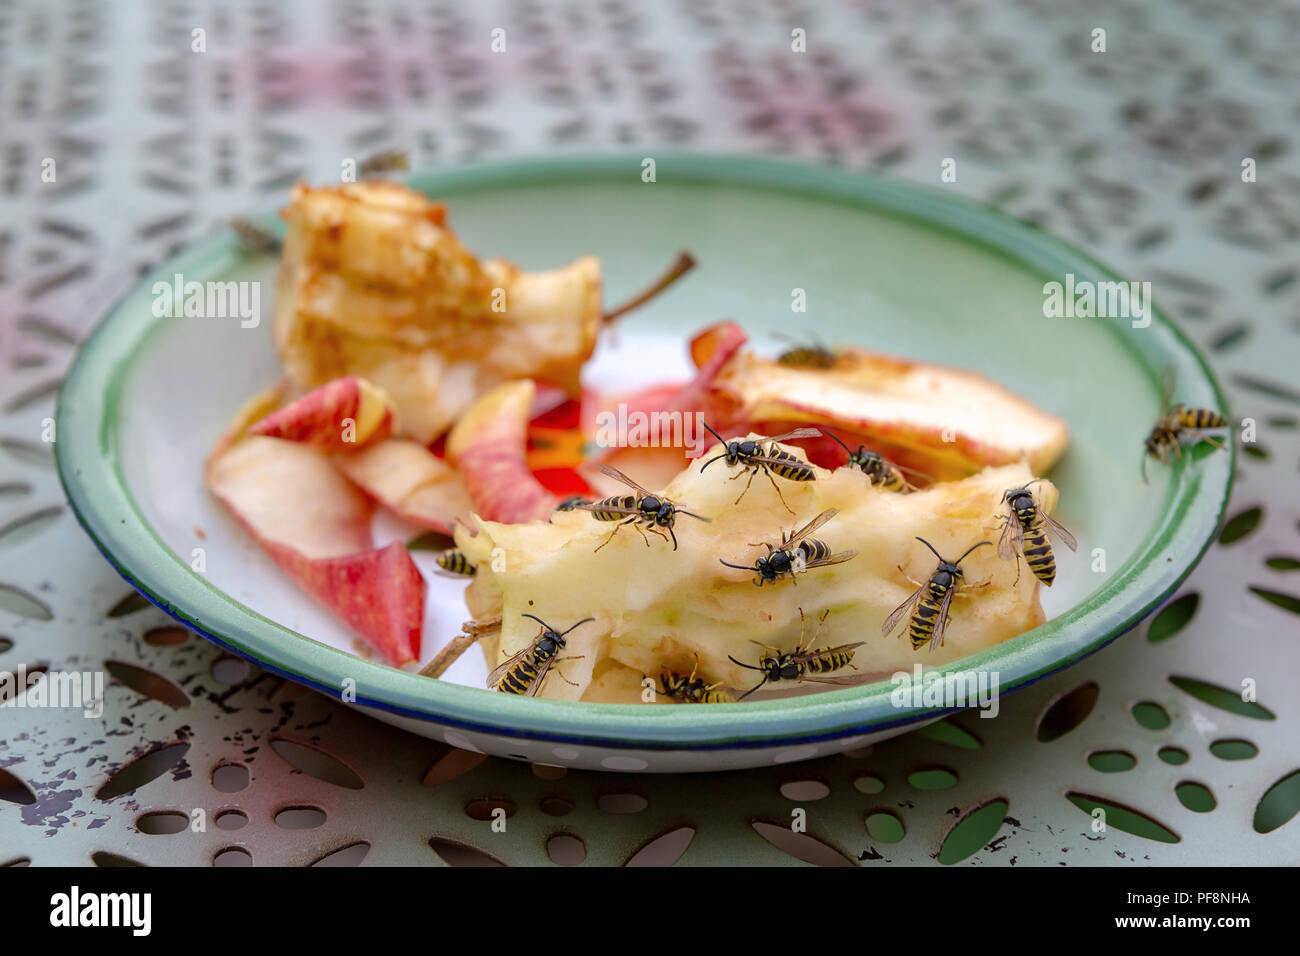 A group of Social Wasps - Vespula germanica - feeding outdoors on apple left overs on the table. Stock Photo